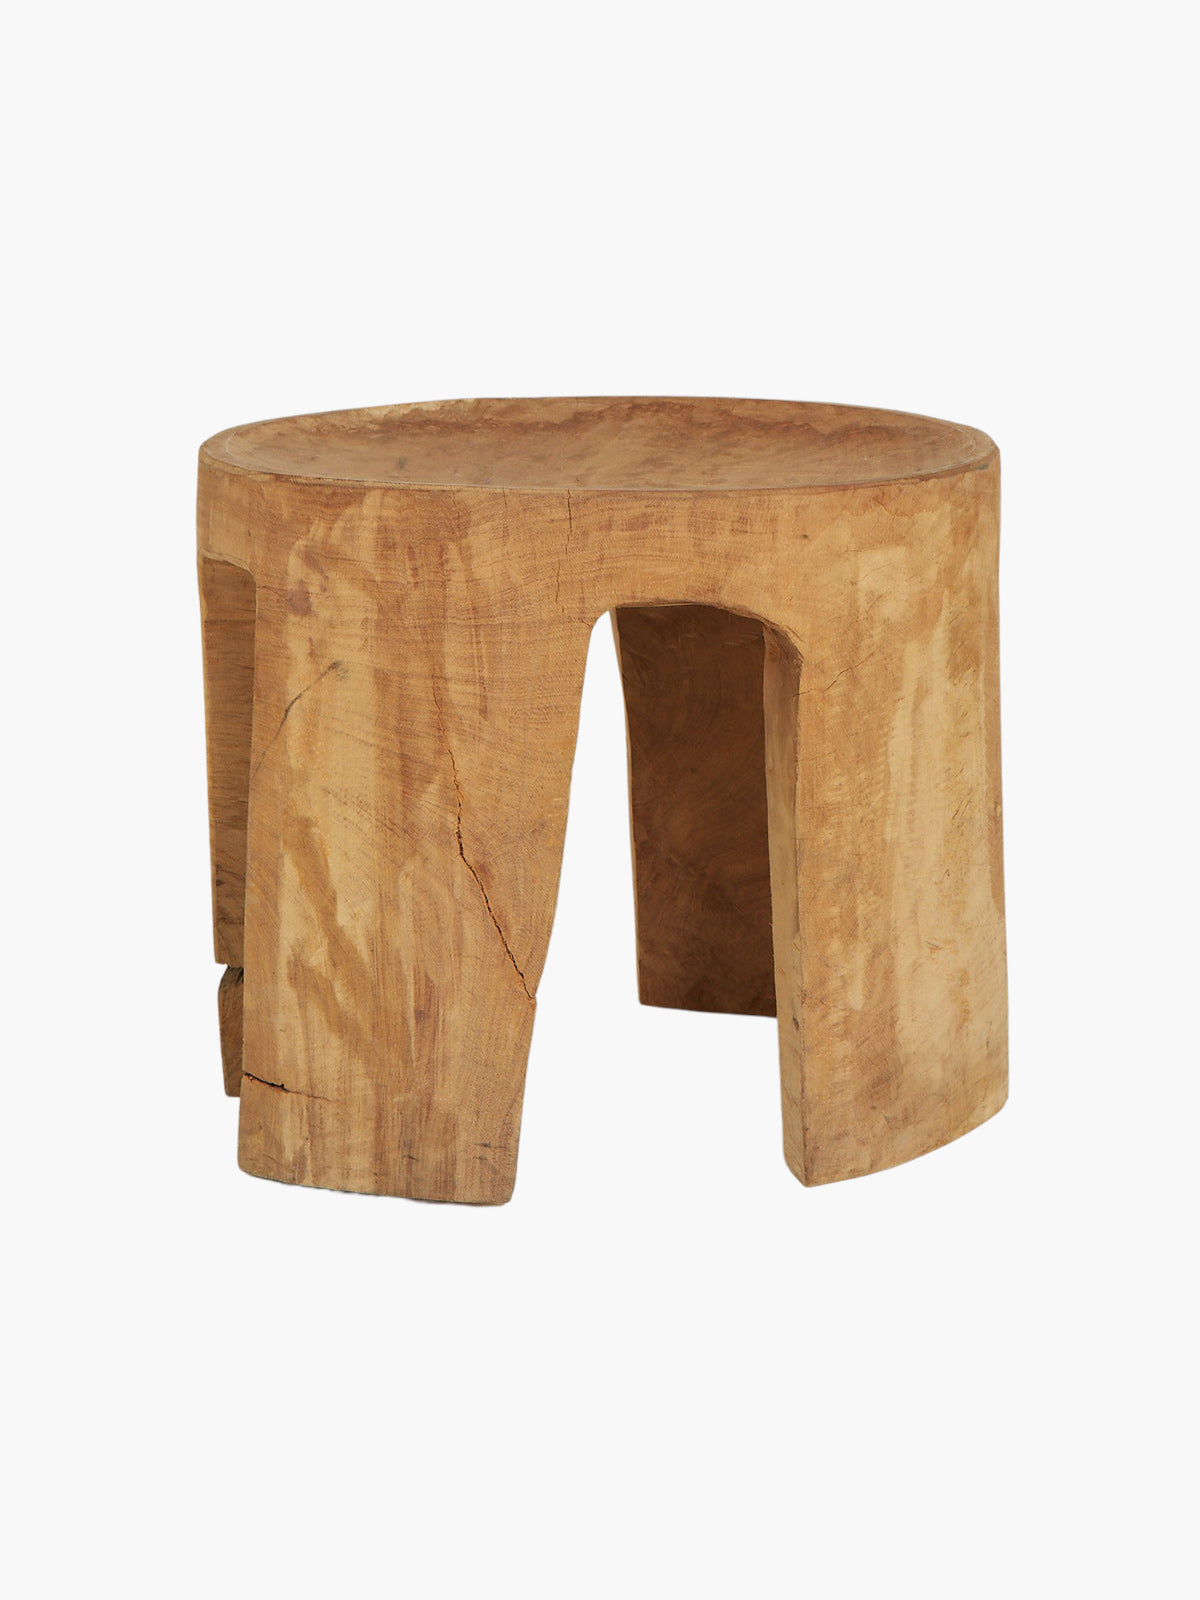 Side Trifecta Table | Piopo Wood Side Trifecta Table | Piopo Wood